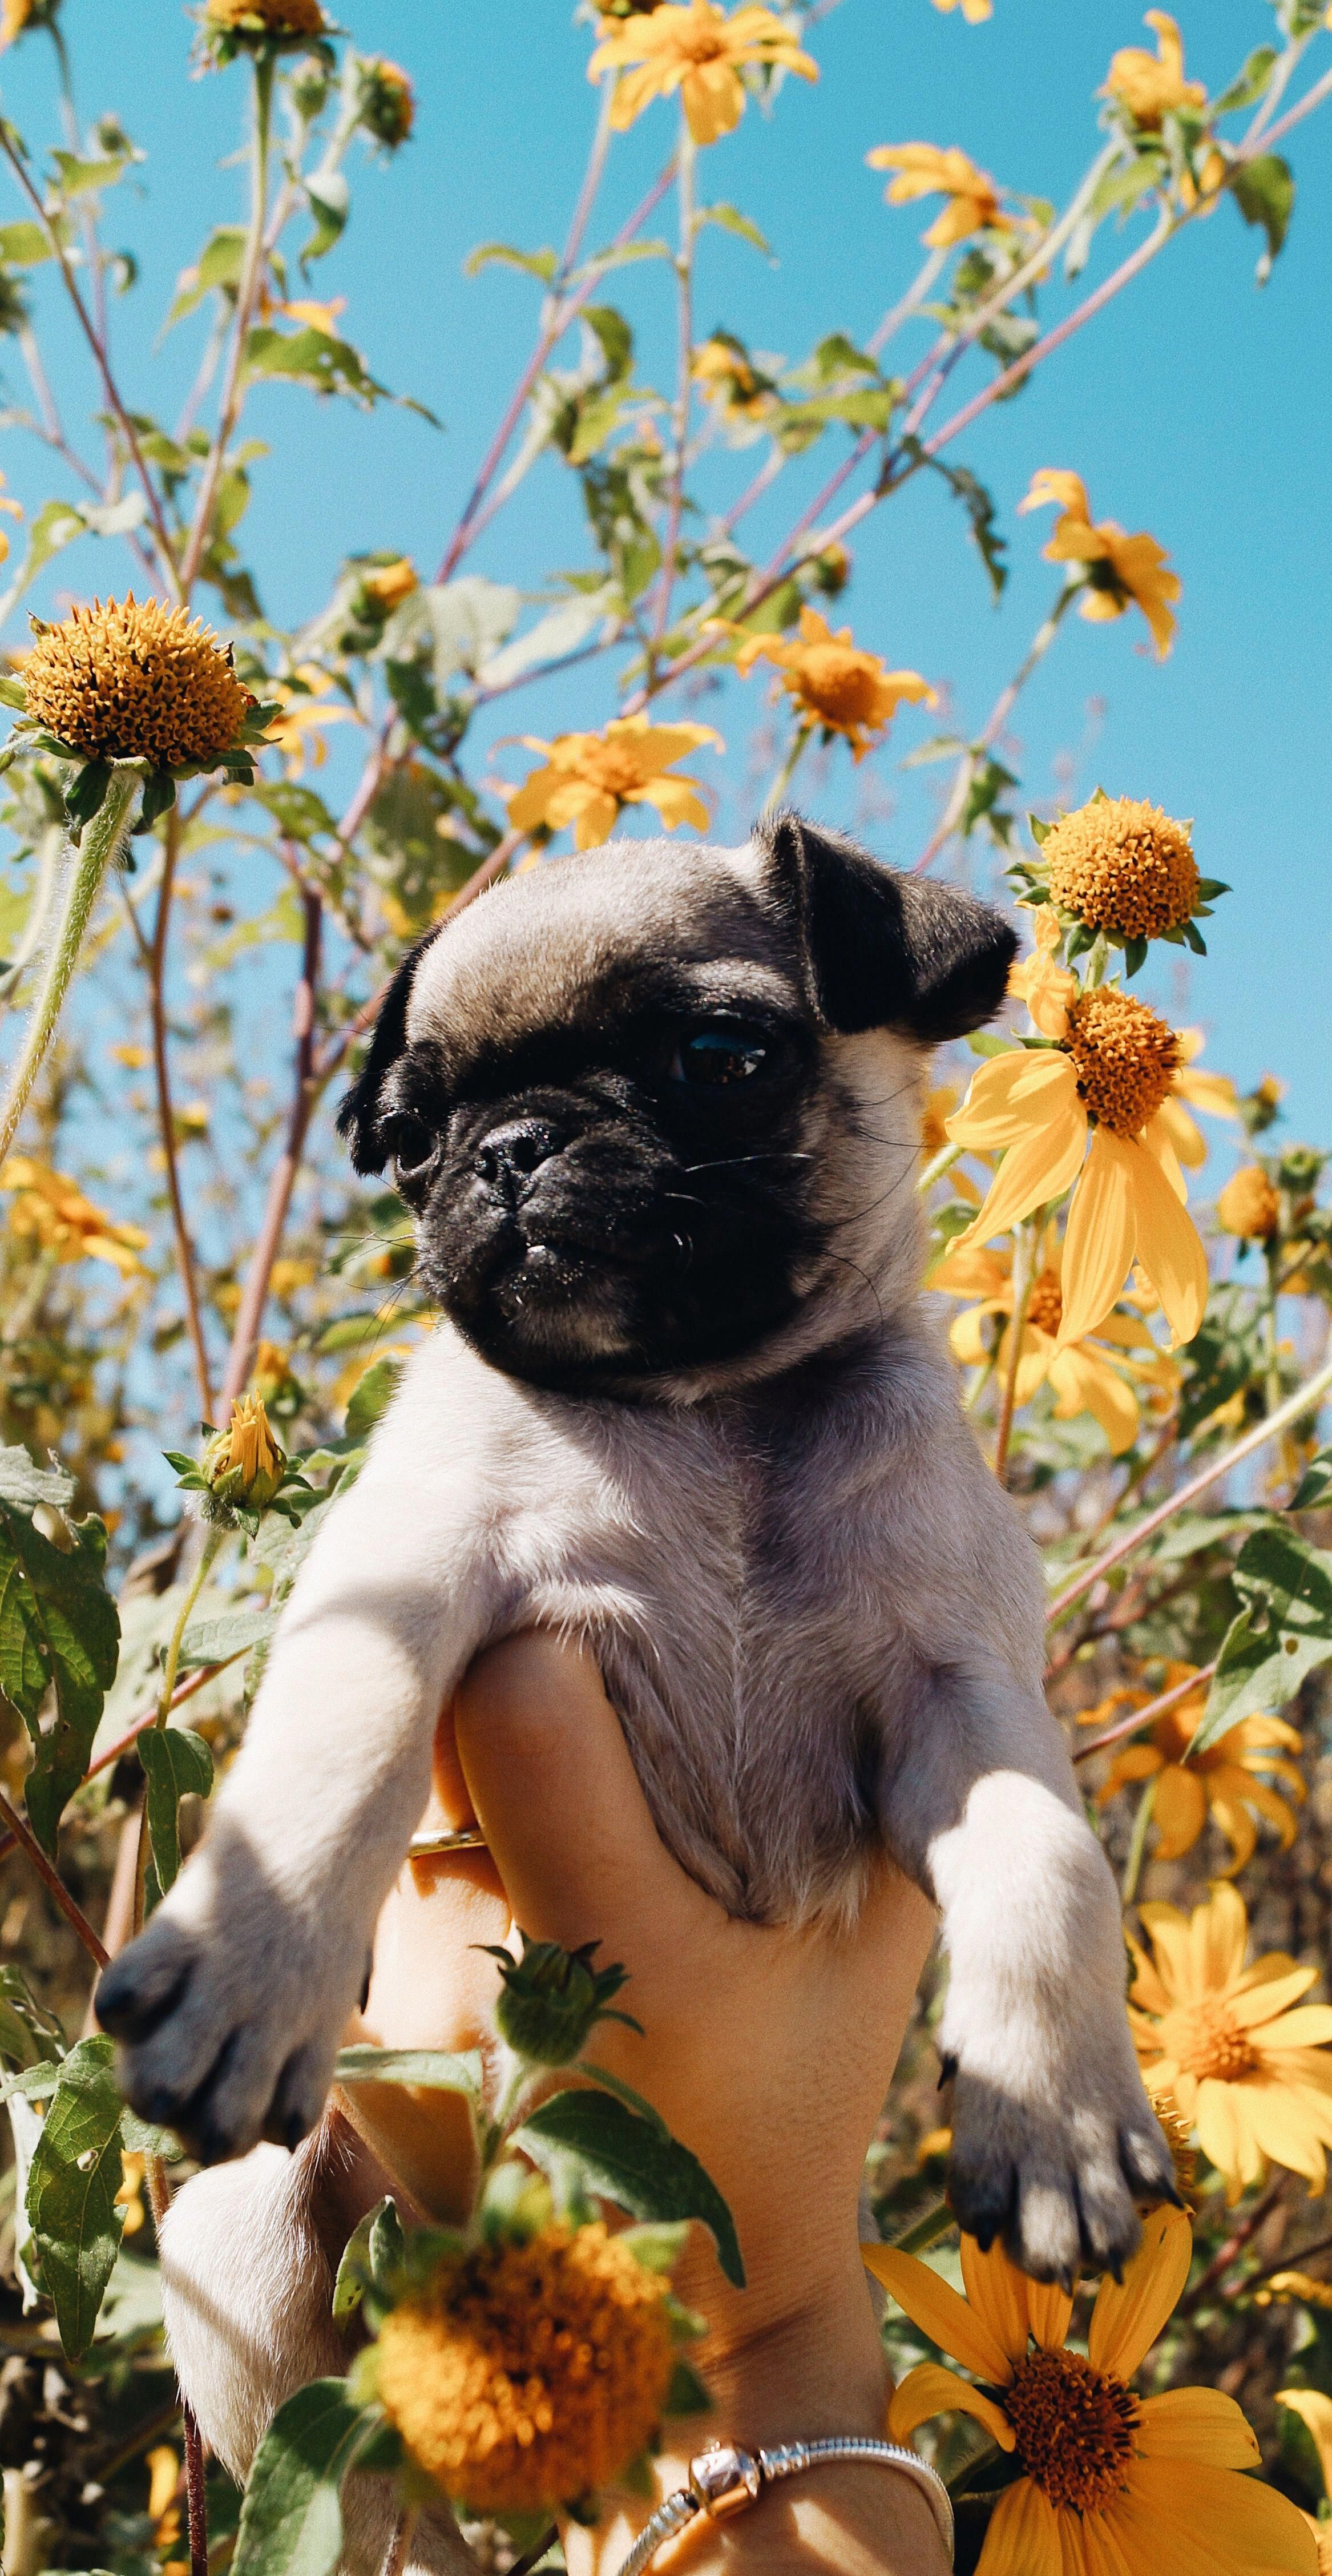 A pug dog is being held by someone - Dog, puppy